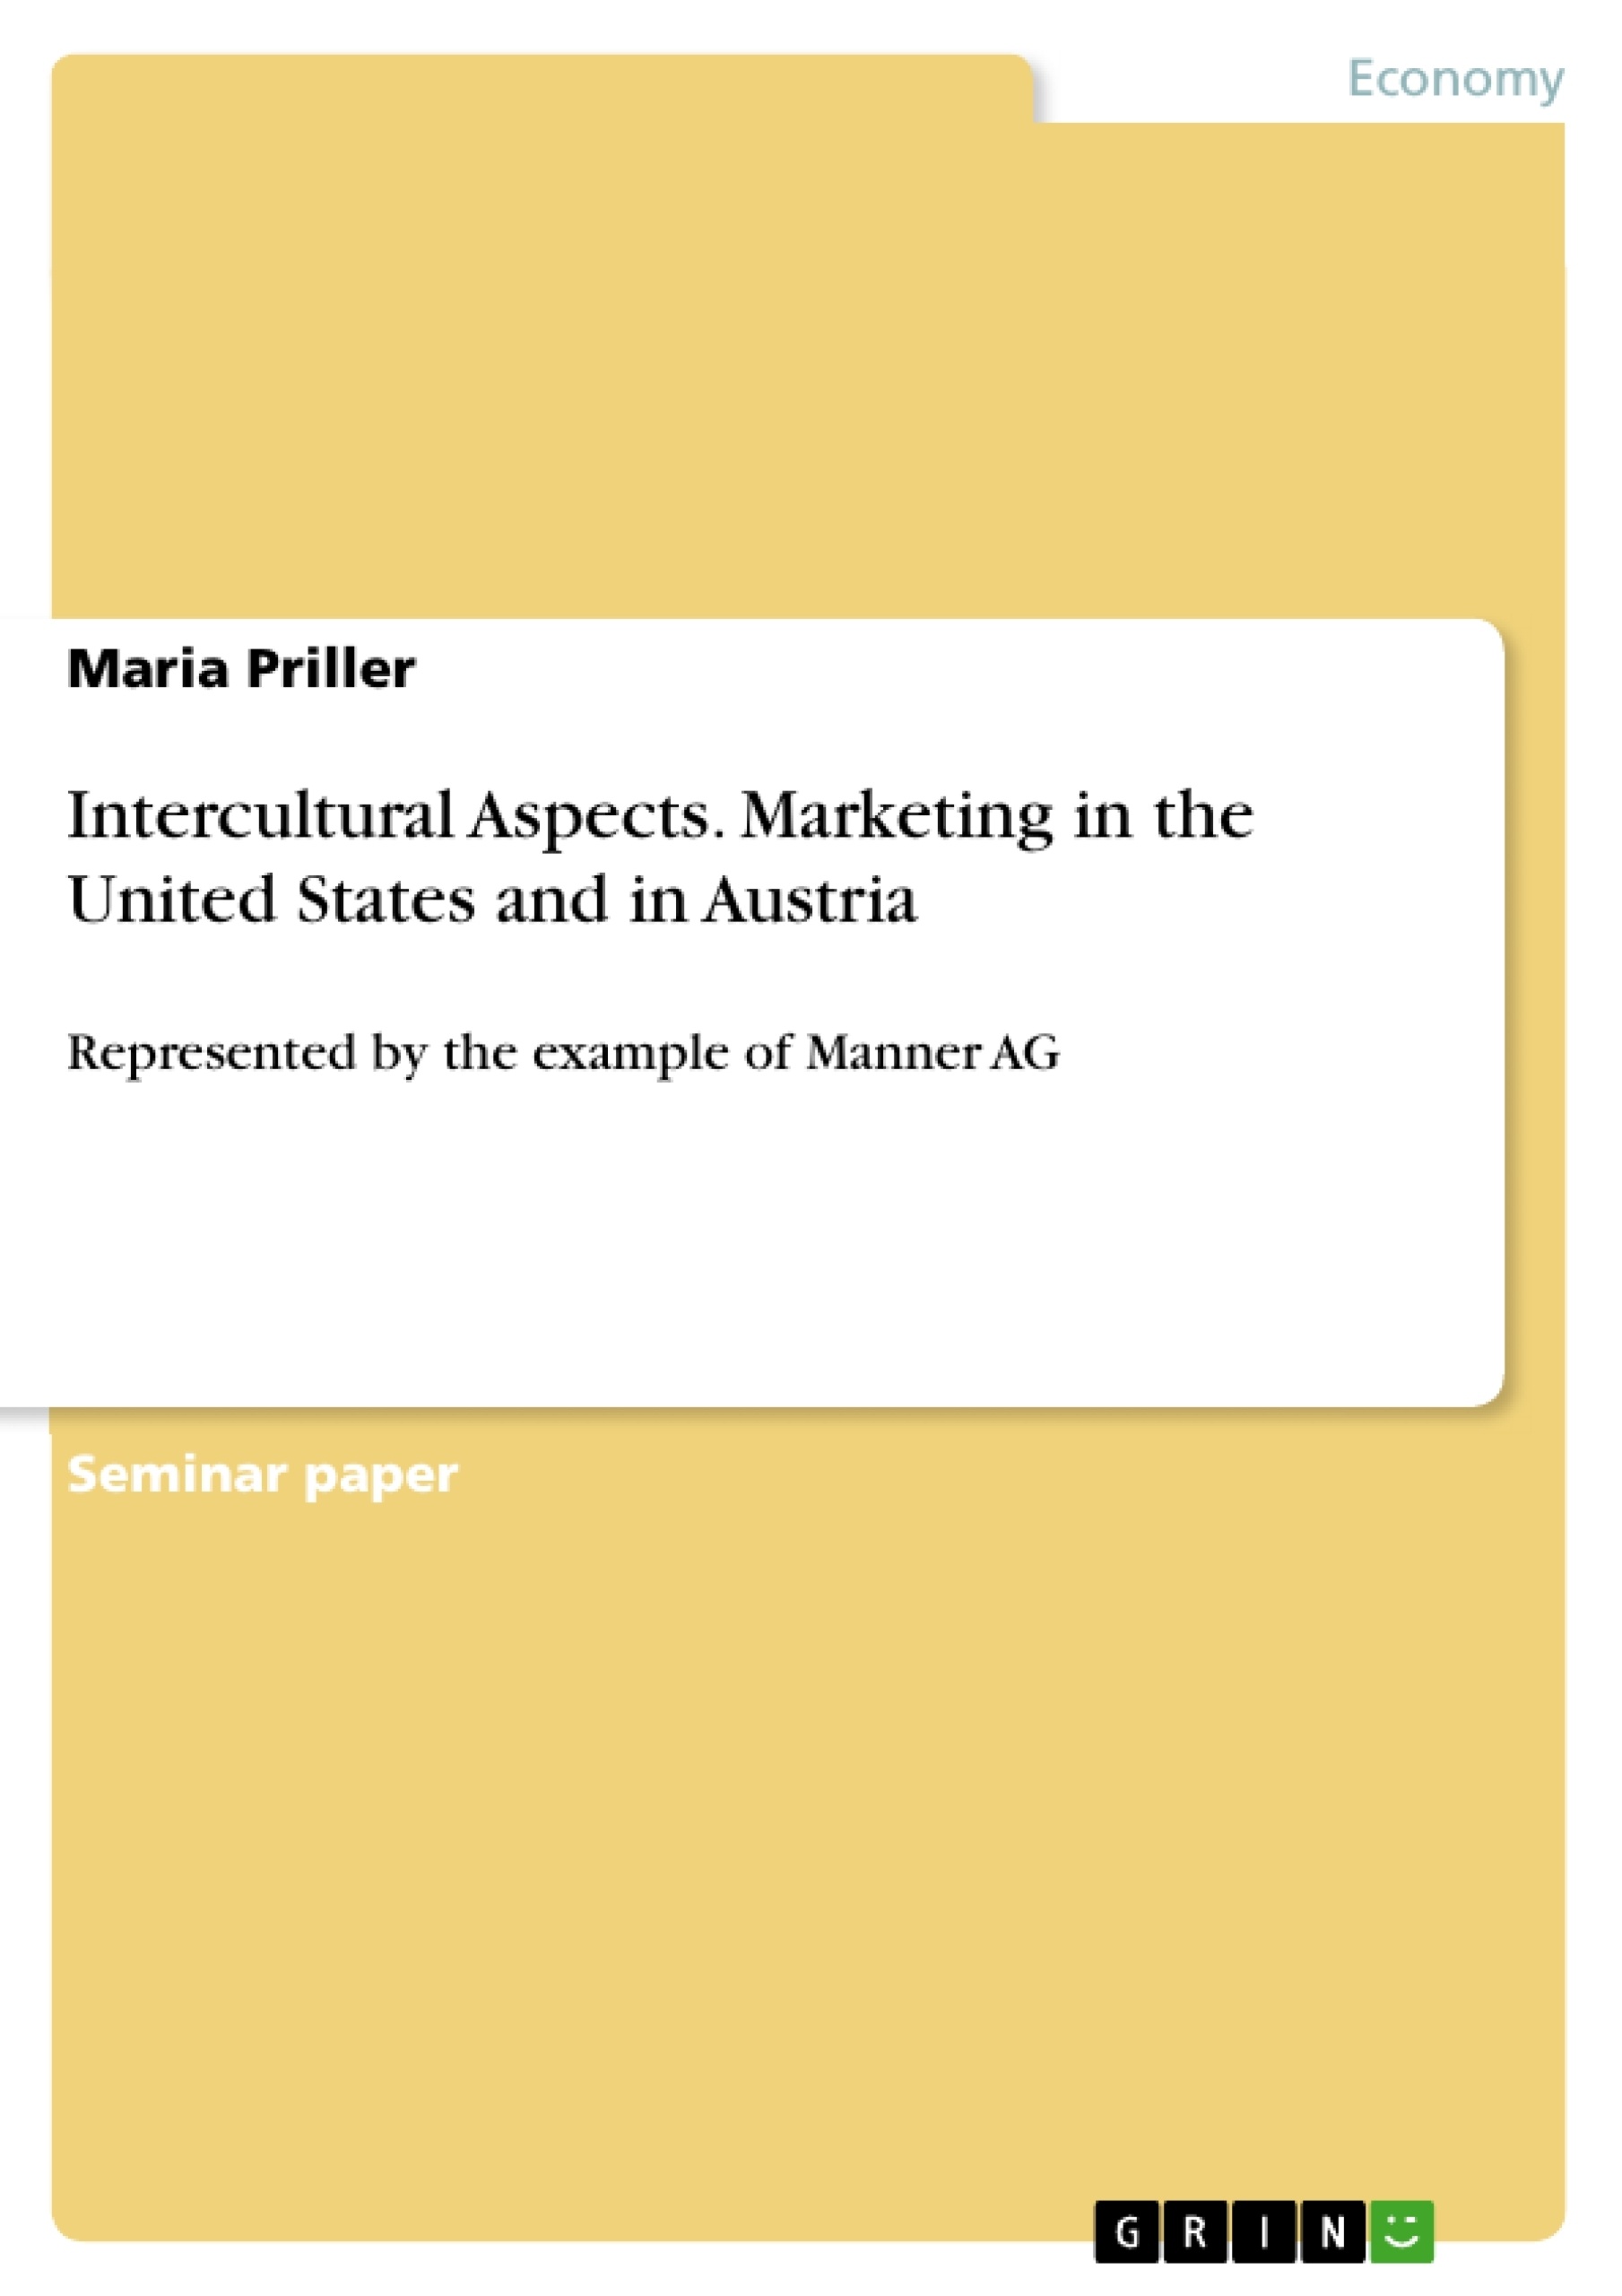 Título: Intercultural Aspects. Marketing in the United States and in Austria